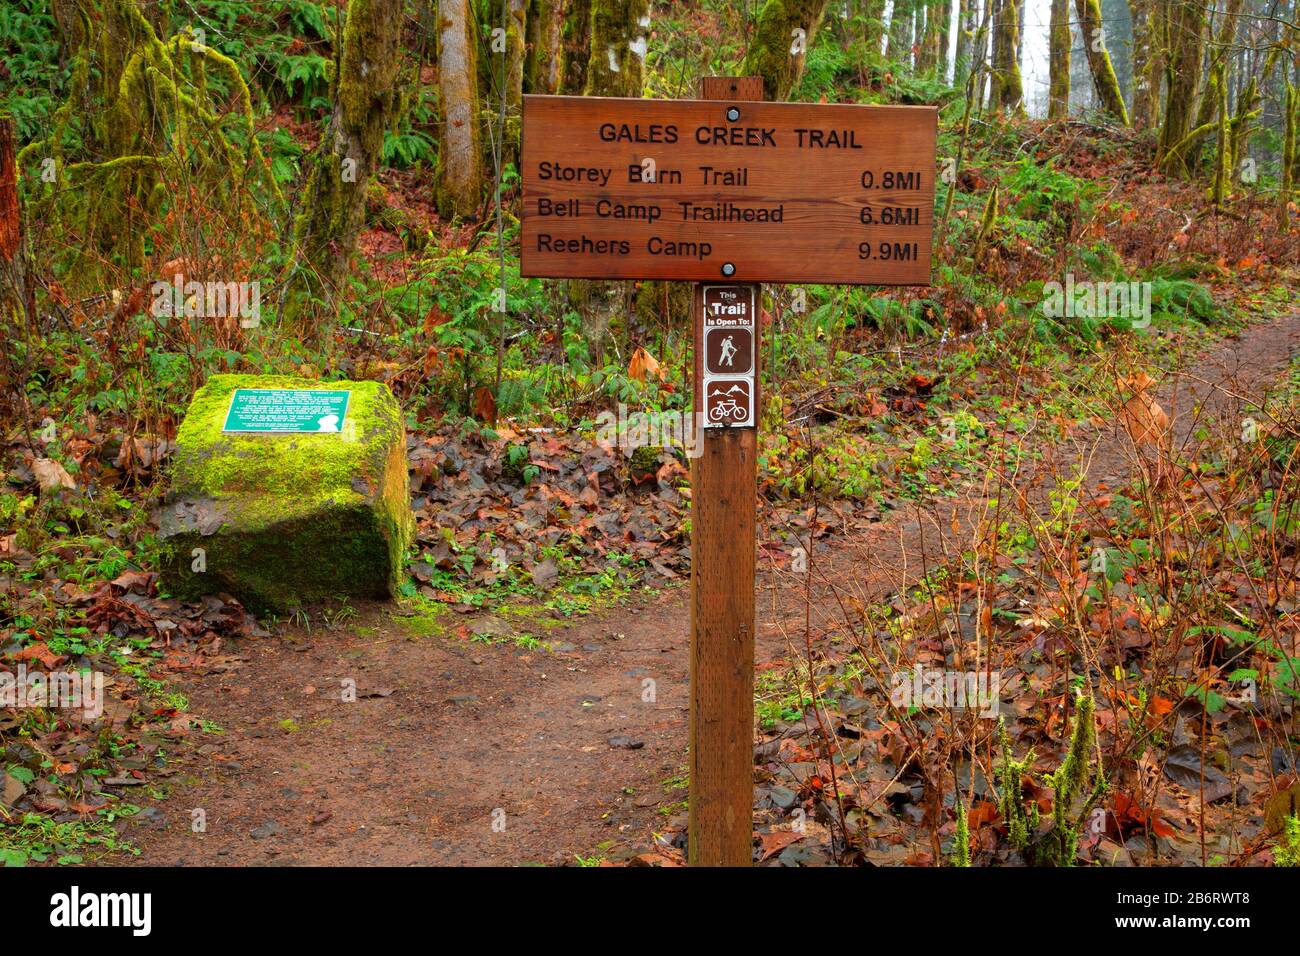 Gales Creek Trail, Tillamook State Forest, Oregon Stock Photo